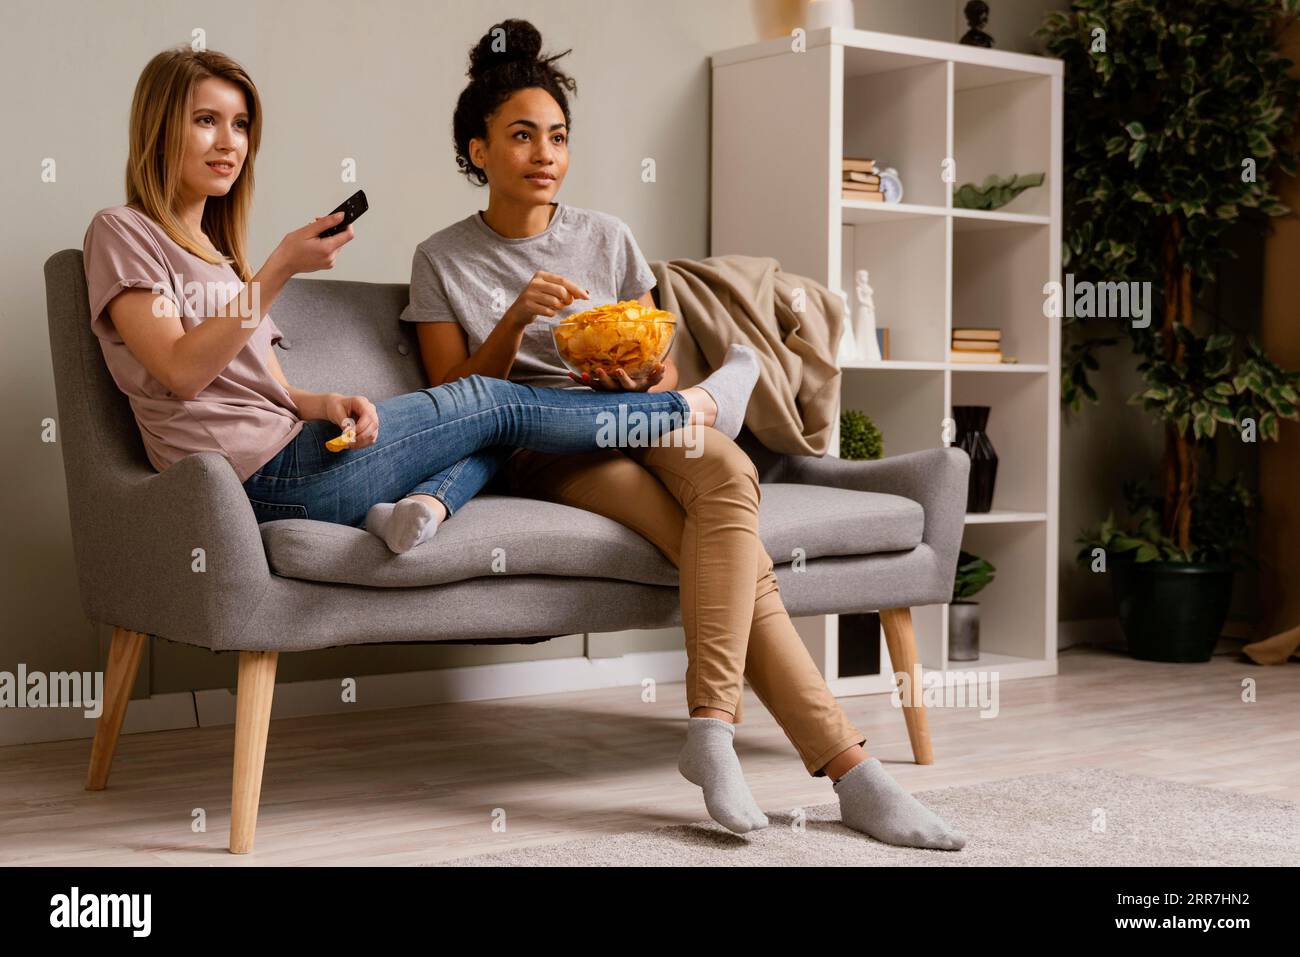 Women couch watching tv eating chips Stock Photo